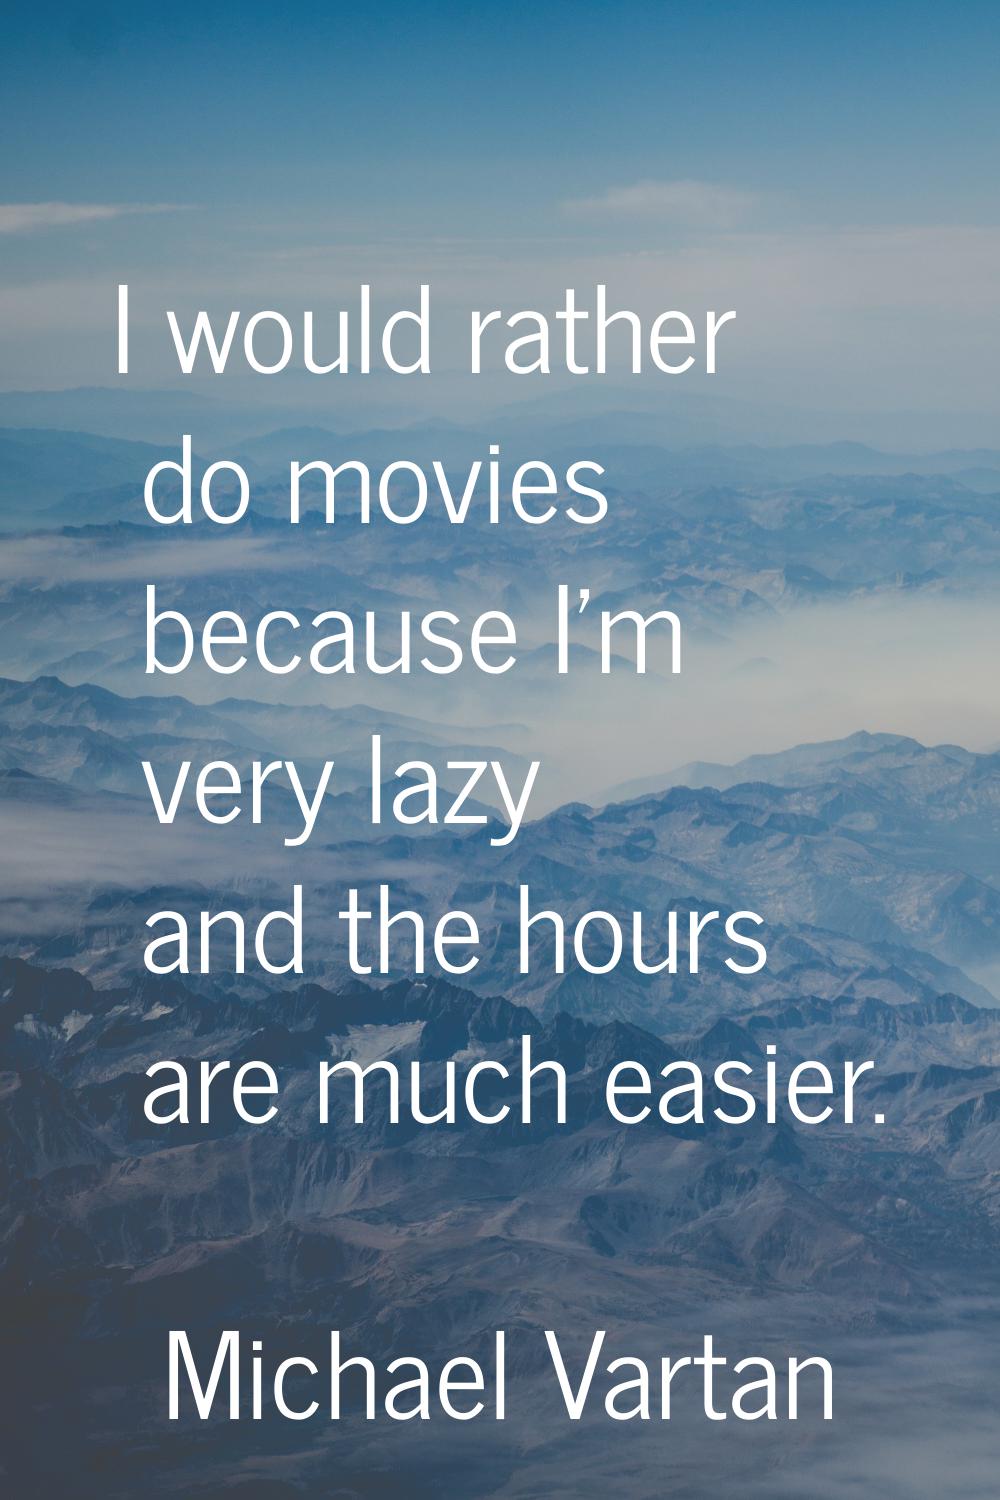 I would rather do movies because I'm very lazy and the hours are much easier.